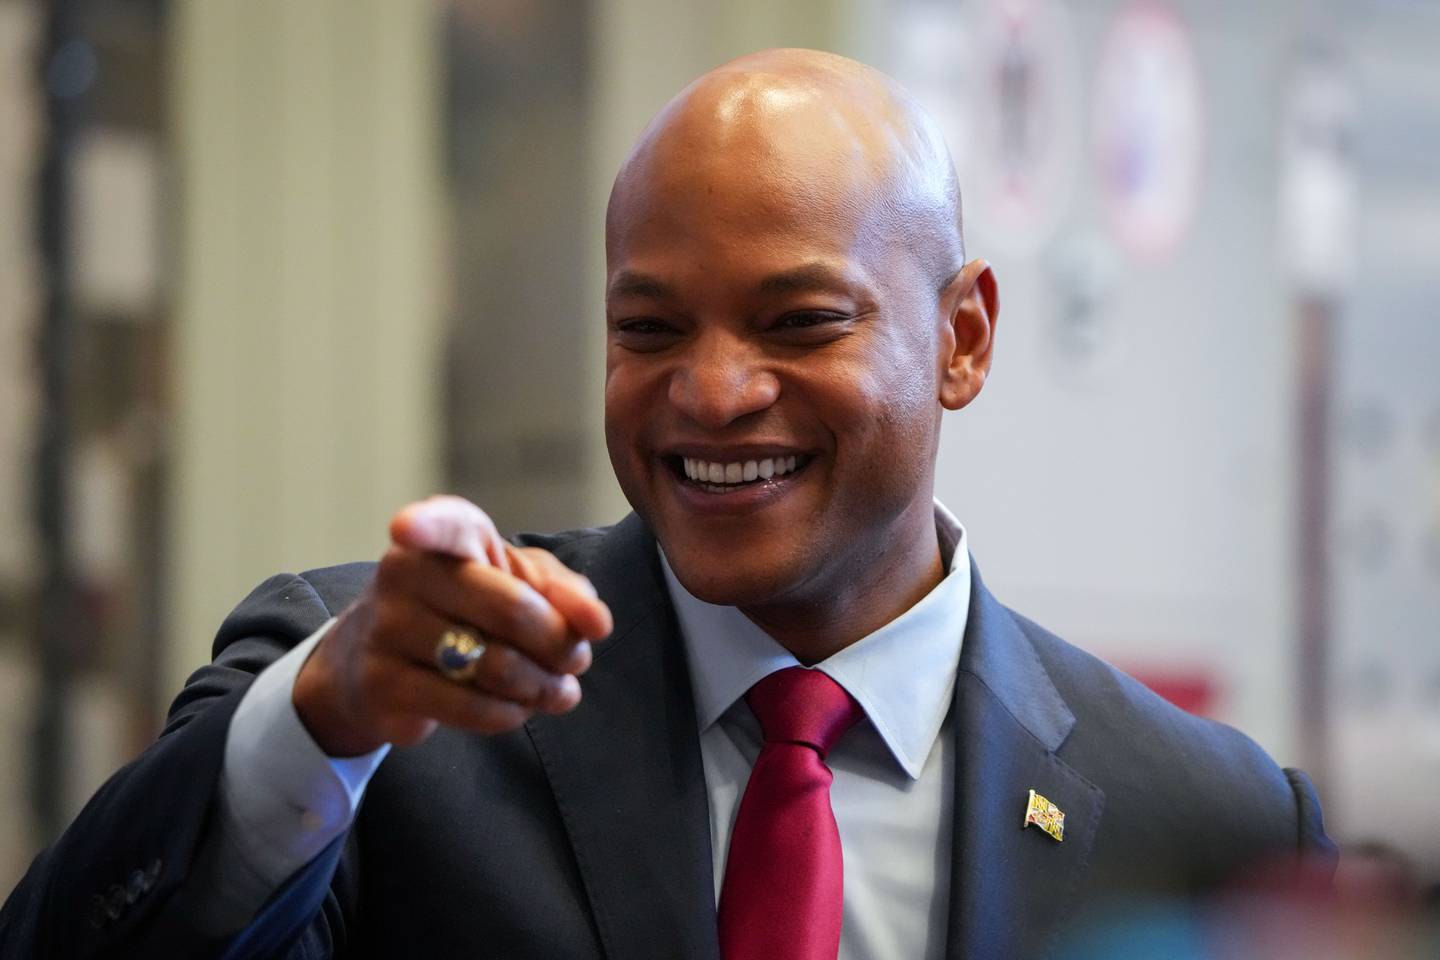 Maryland Gov. Wes Moore points to acknowledge a supporter before taking his seat at U.S. President Joe Biden’s speaking event on 2/15/23. Biden spoke to members of the IBEW Local 26 union at their office in Lanham, Maryland